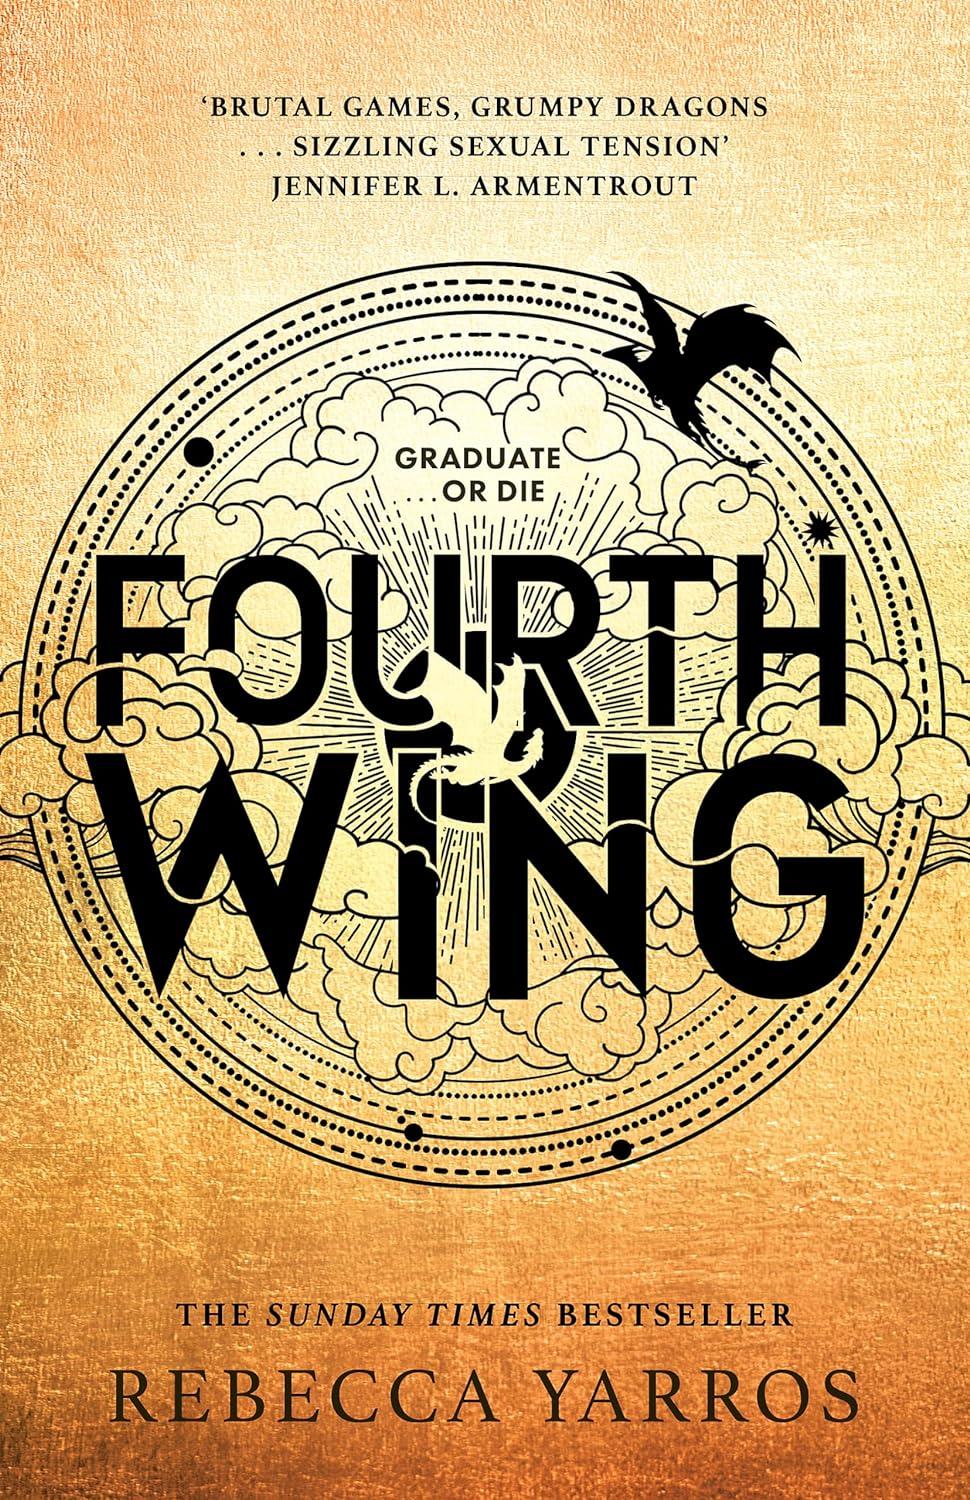 Fourth Wing - The Empyrean Series